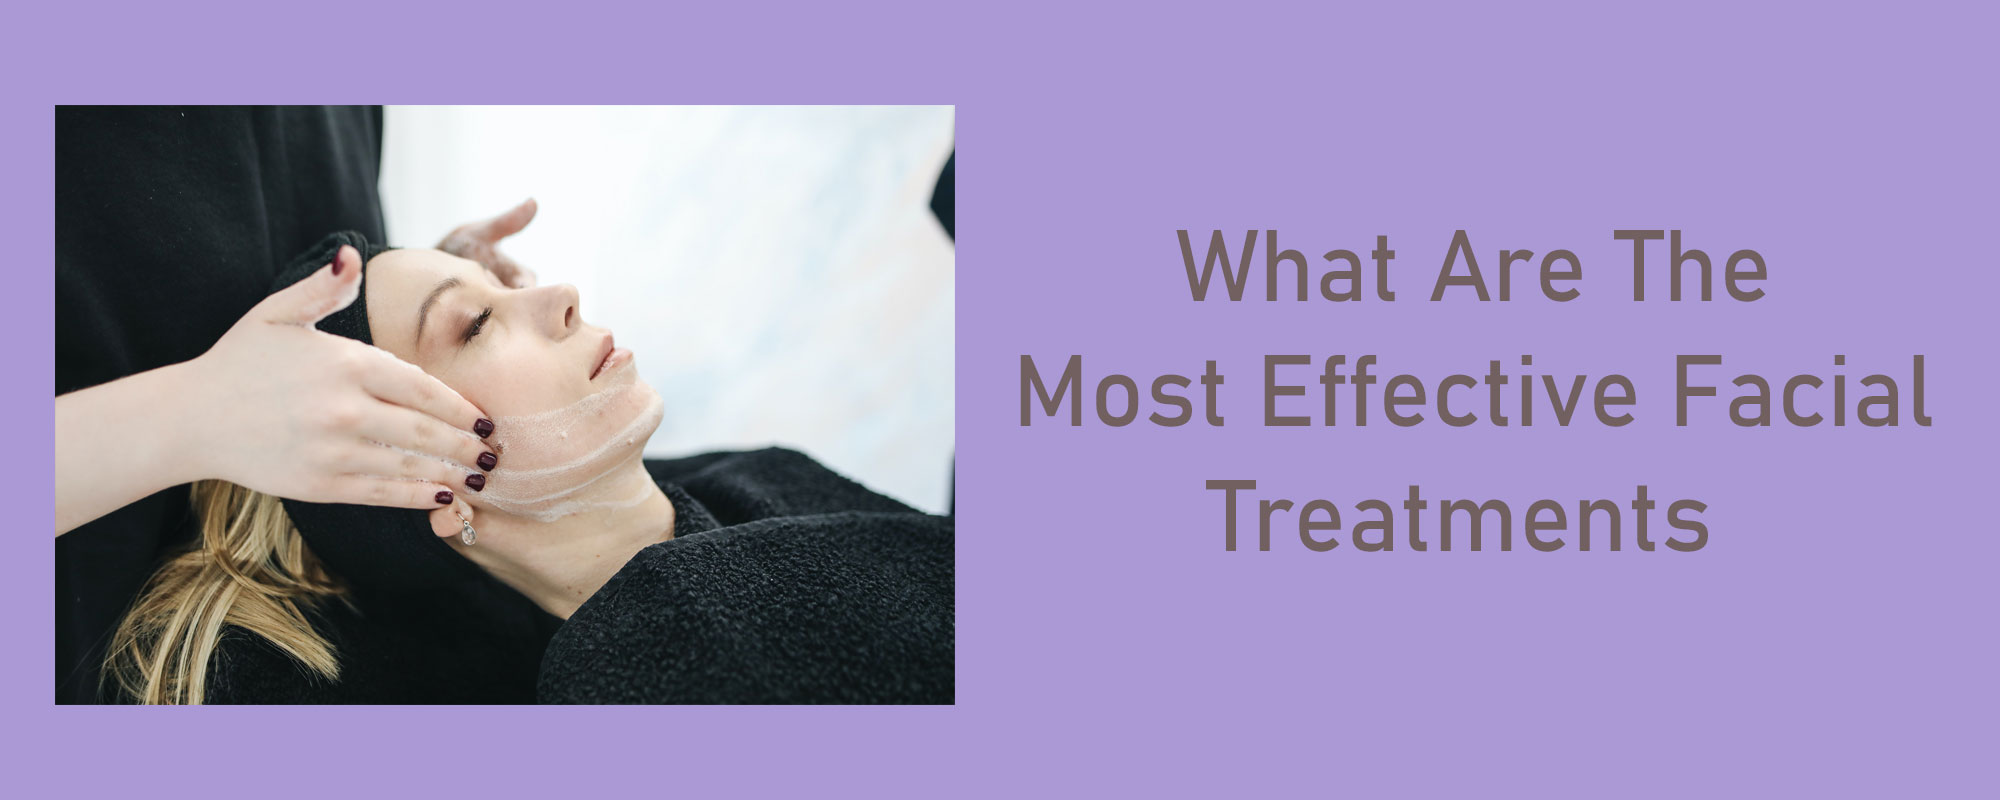 What Are The Most Effective Facial Treatments? - 1